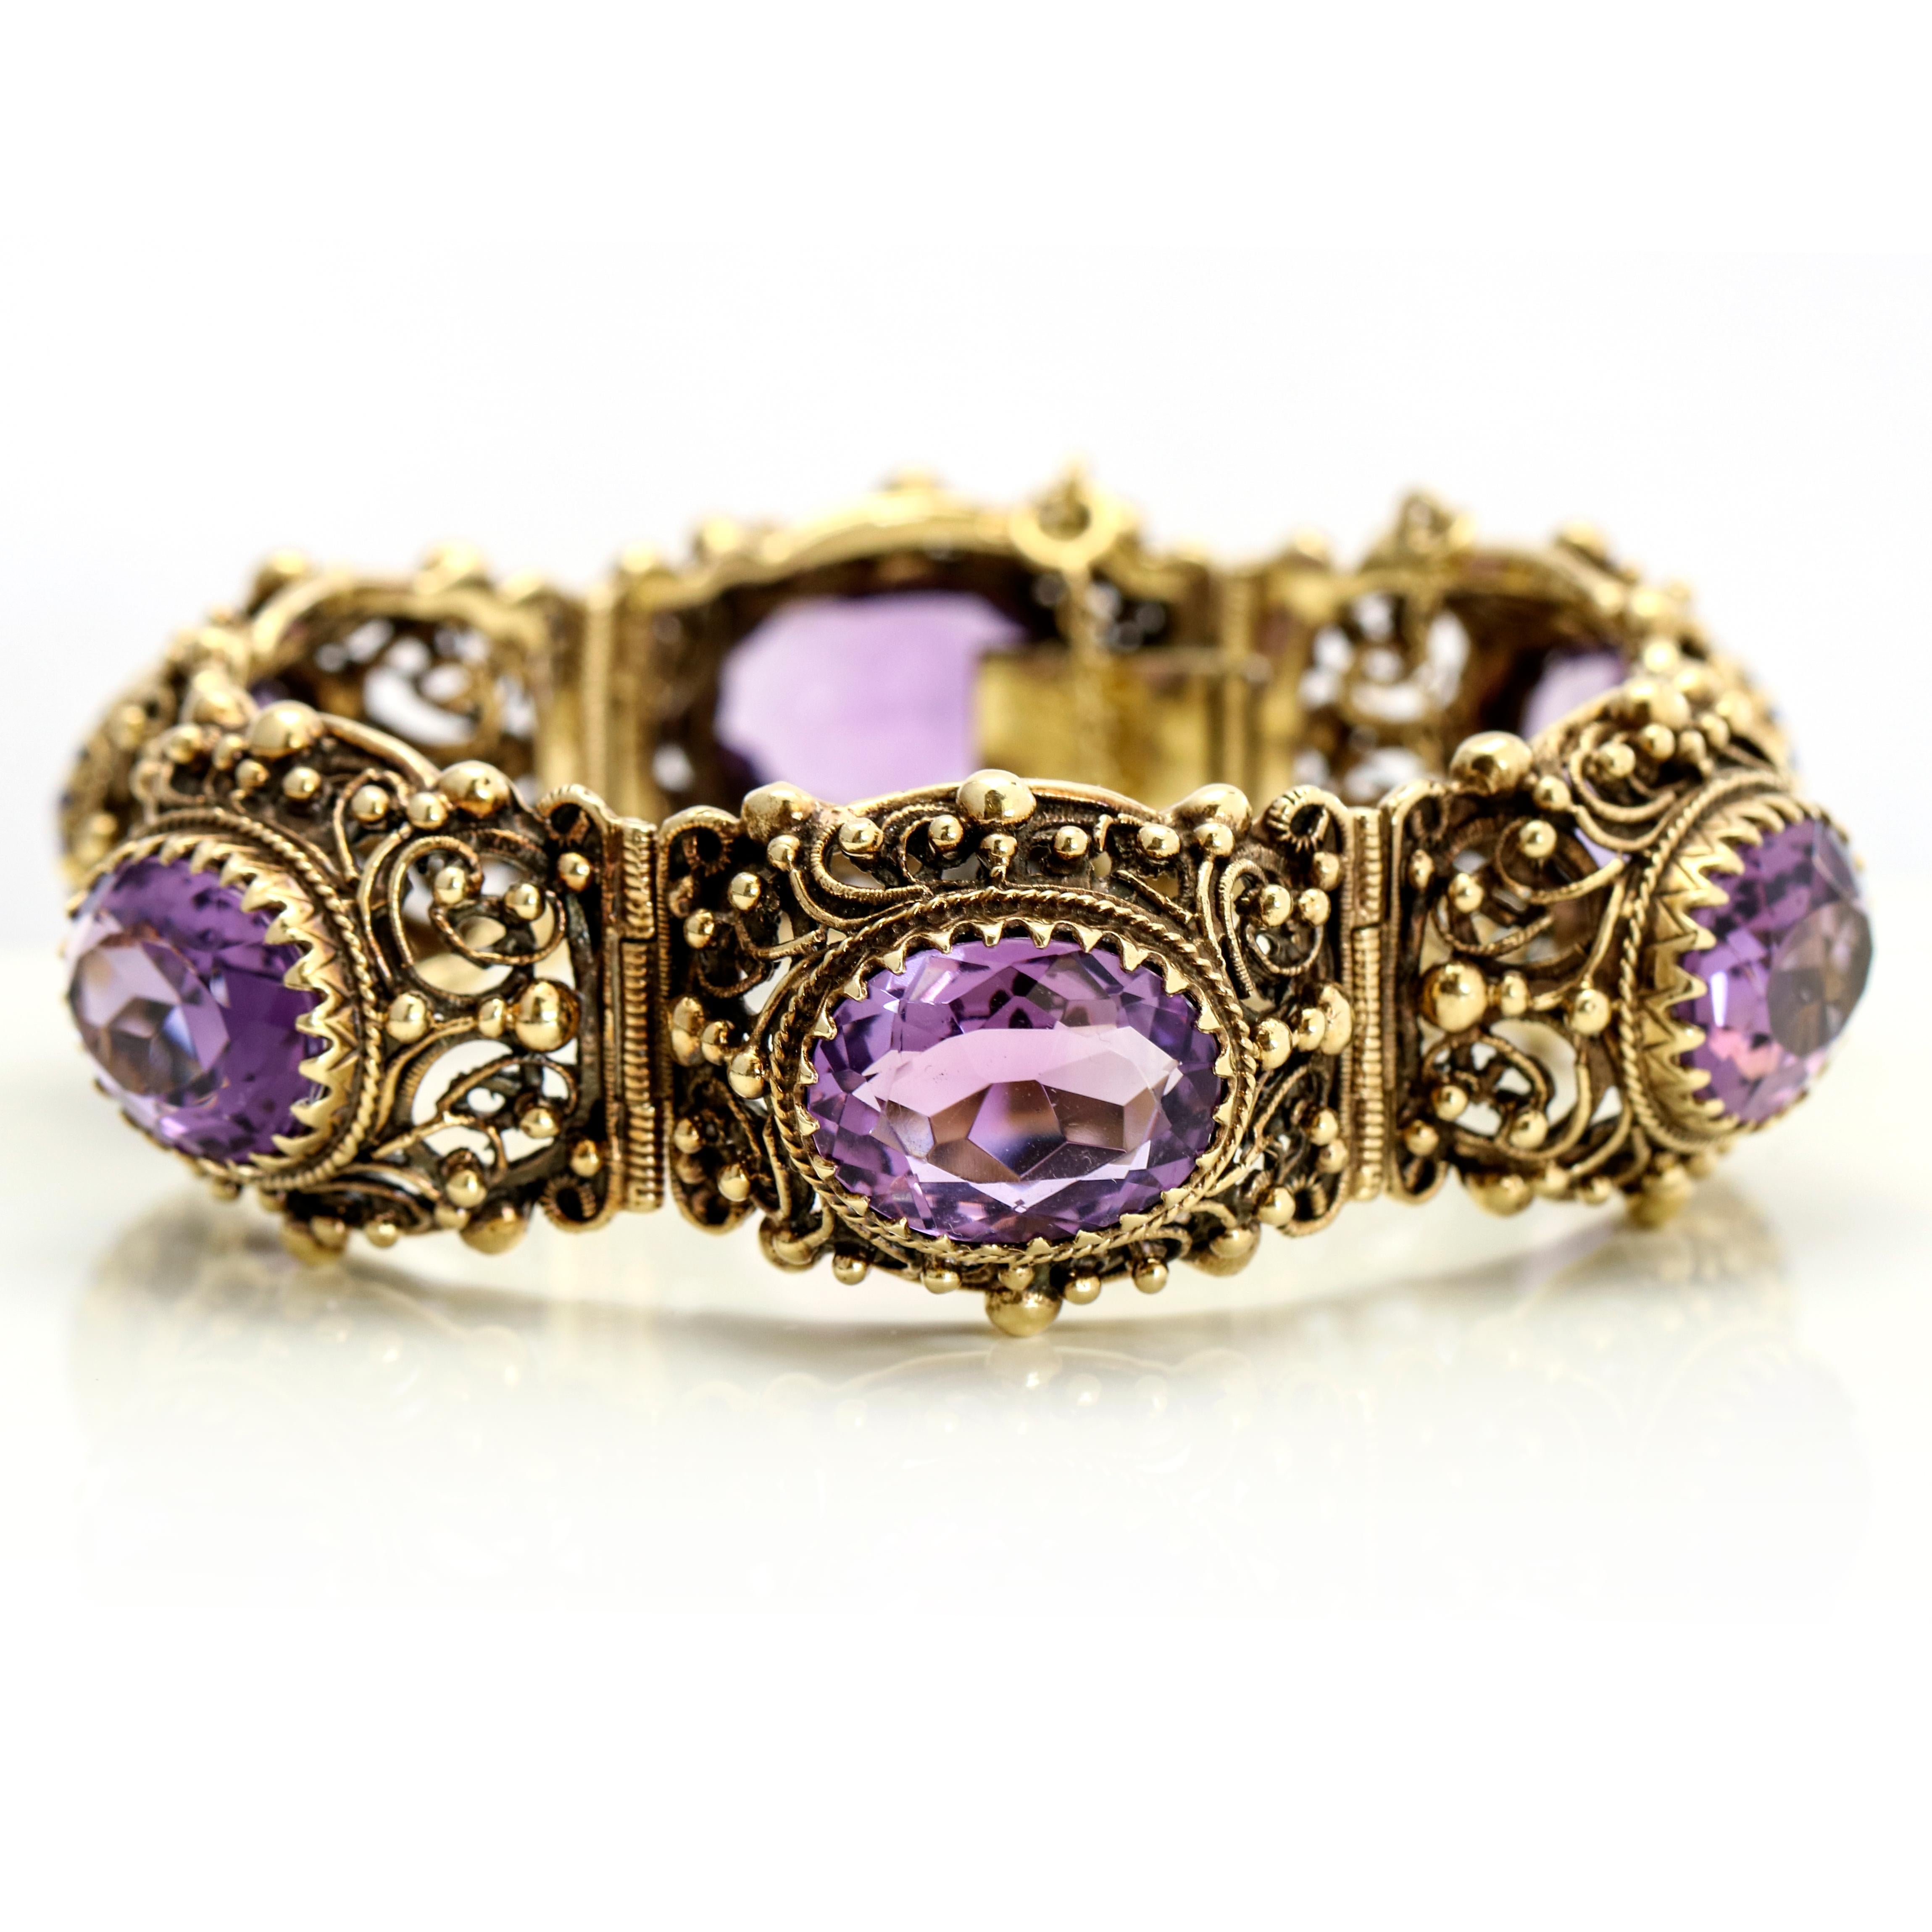 Victorian style statement bracelet in 14-karat gold with oval-cut natural amethyst. The bracelet is signed with a letter A inside a shield. The A mark appears on the back of each link. Slide clasp with safety chain. Size medium, fits a wrist up to 6